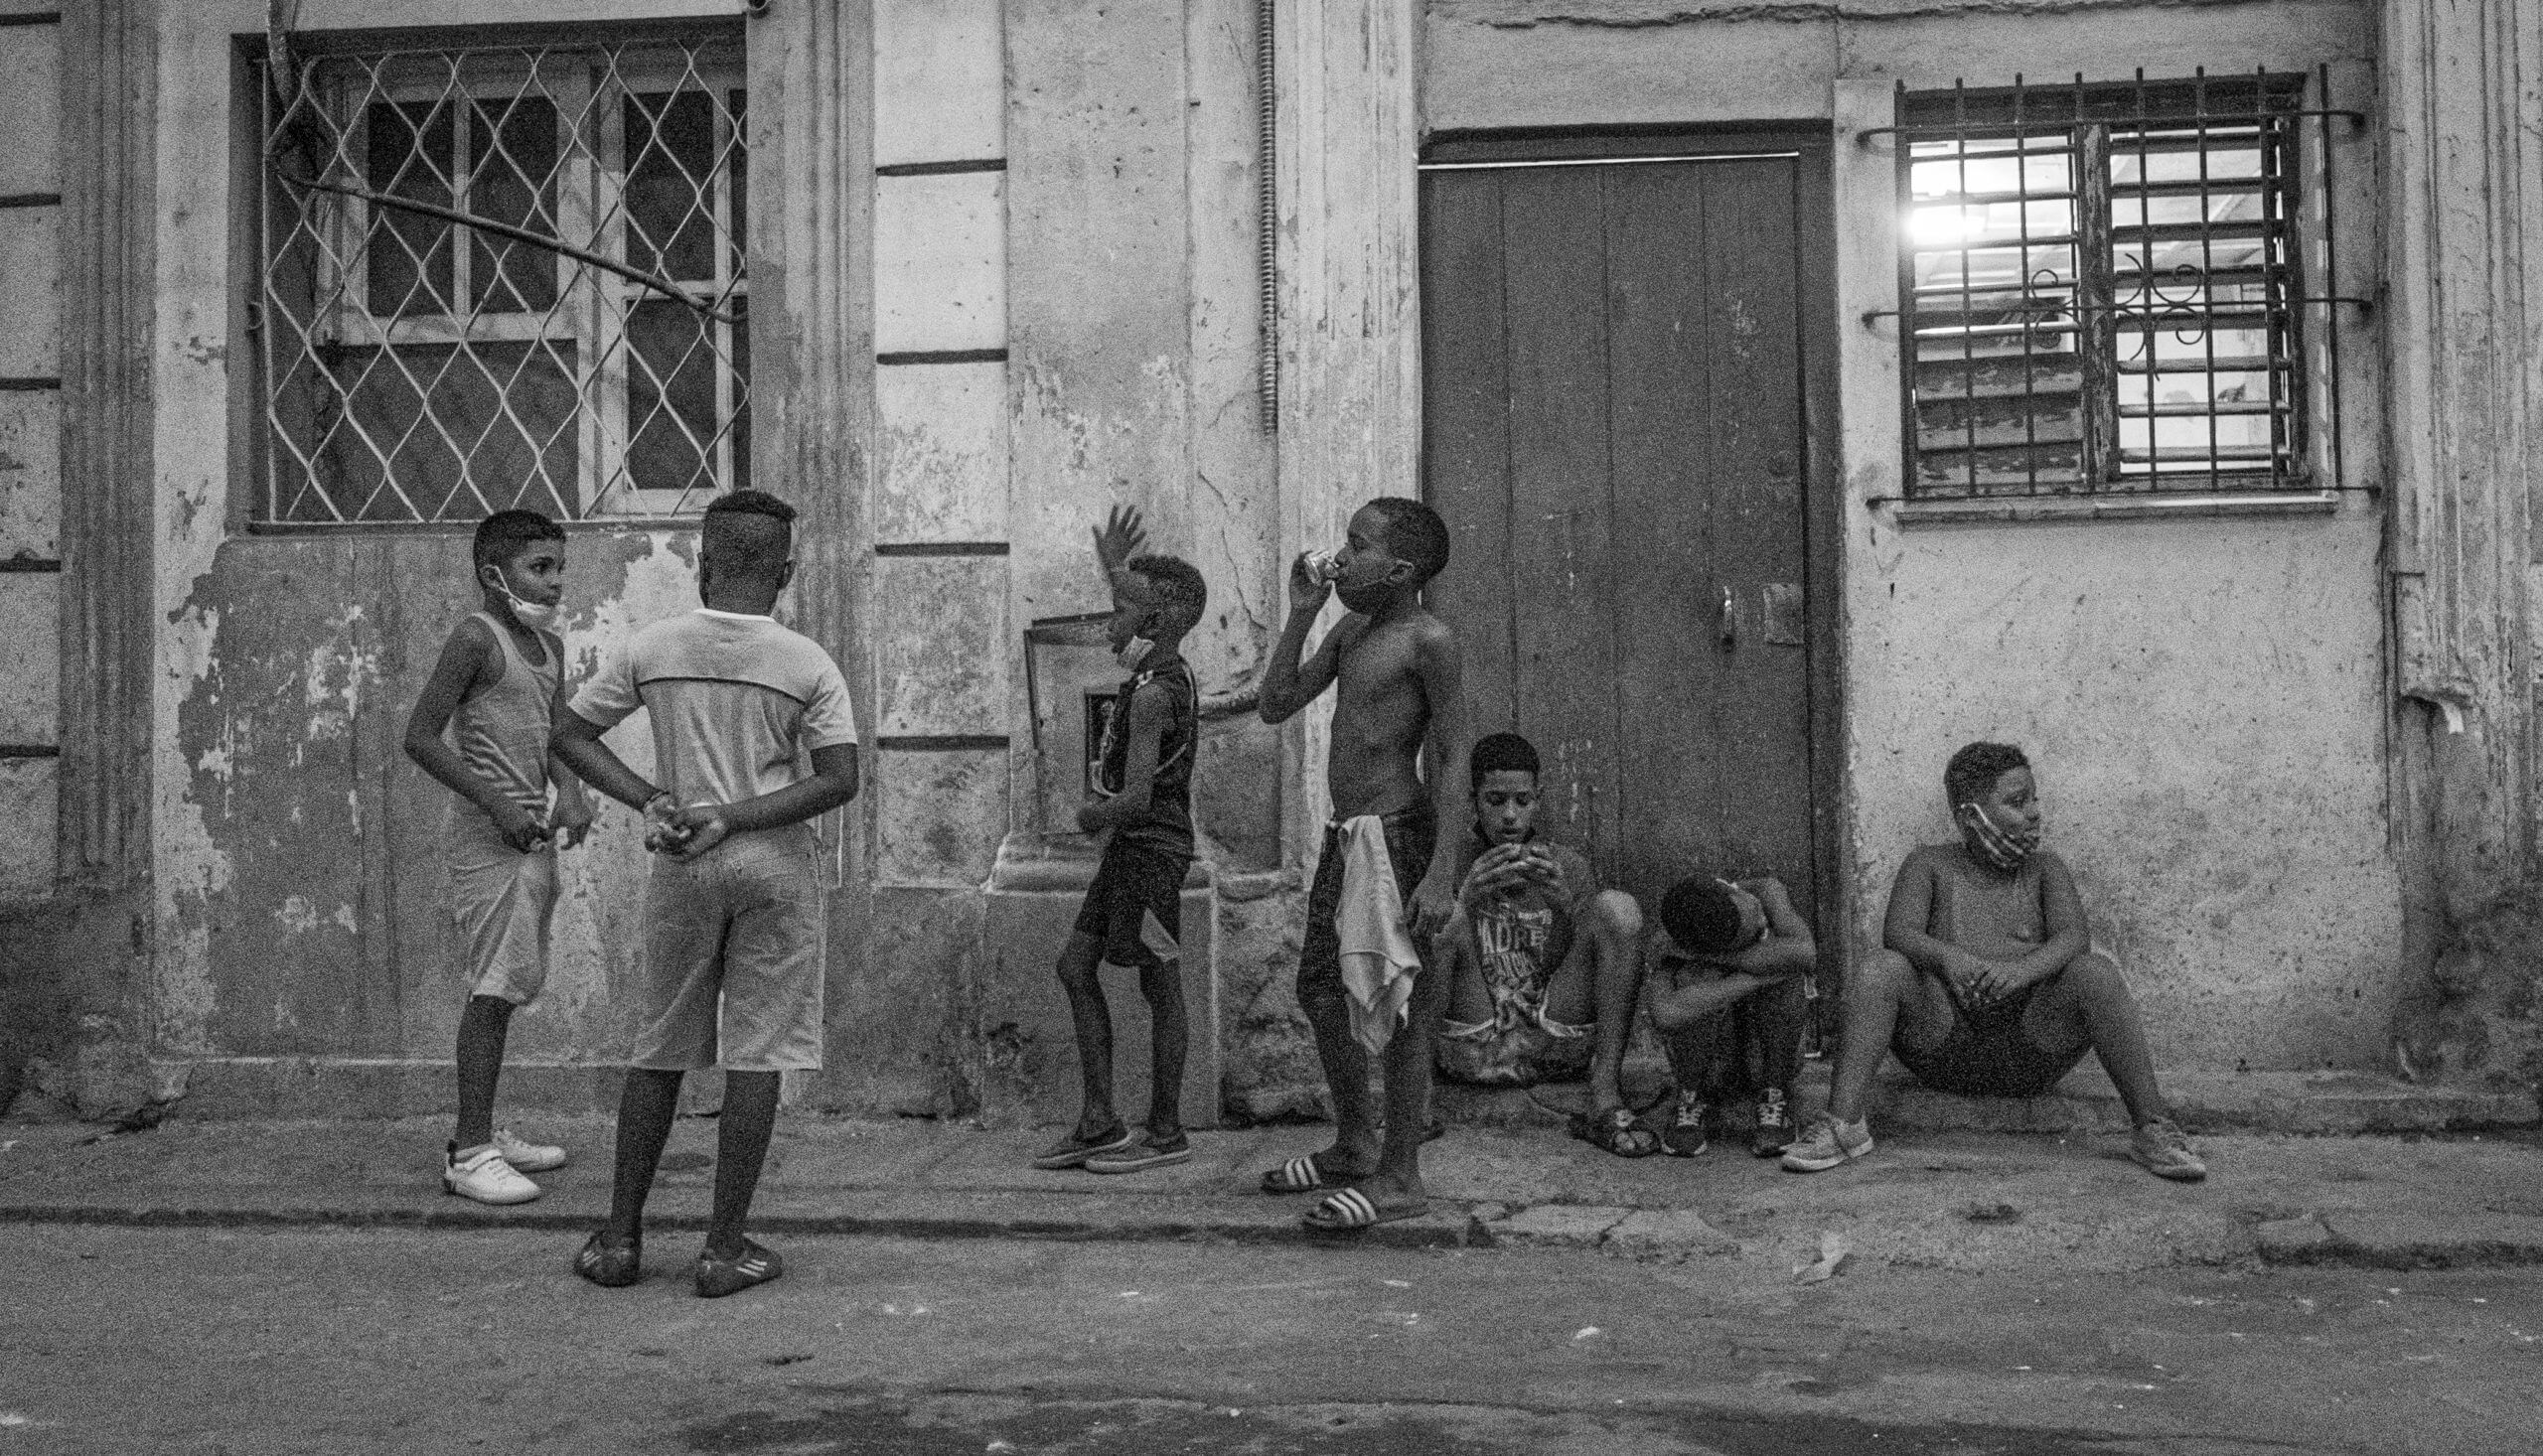 Boys congregate at dusk. Cubans continue to struggle under adverse economic conditions, as evidenced by this scene in the Habana Centro district of the capital. © 2022 John D. Elliott • www.TheHumanPulse.com